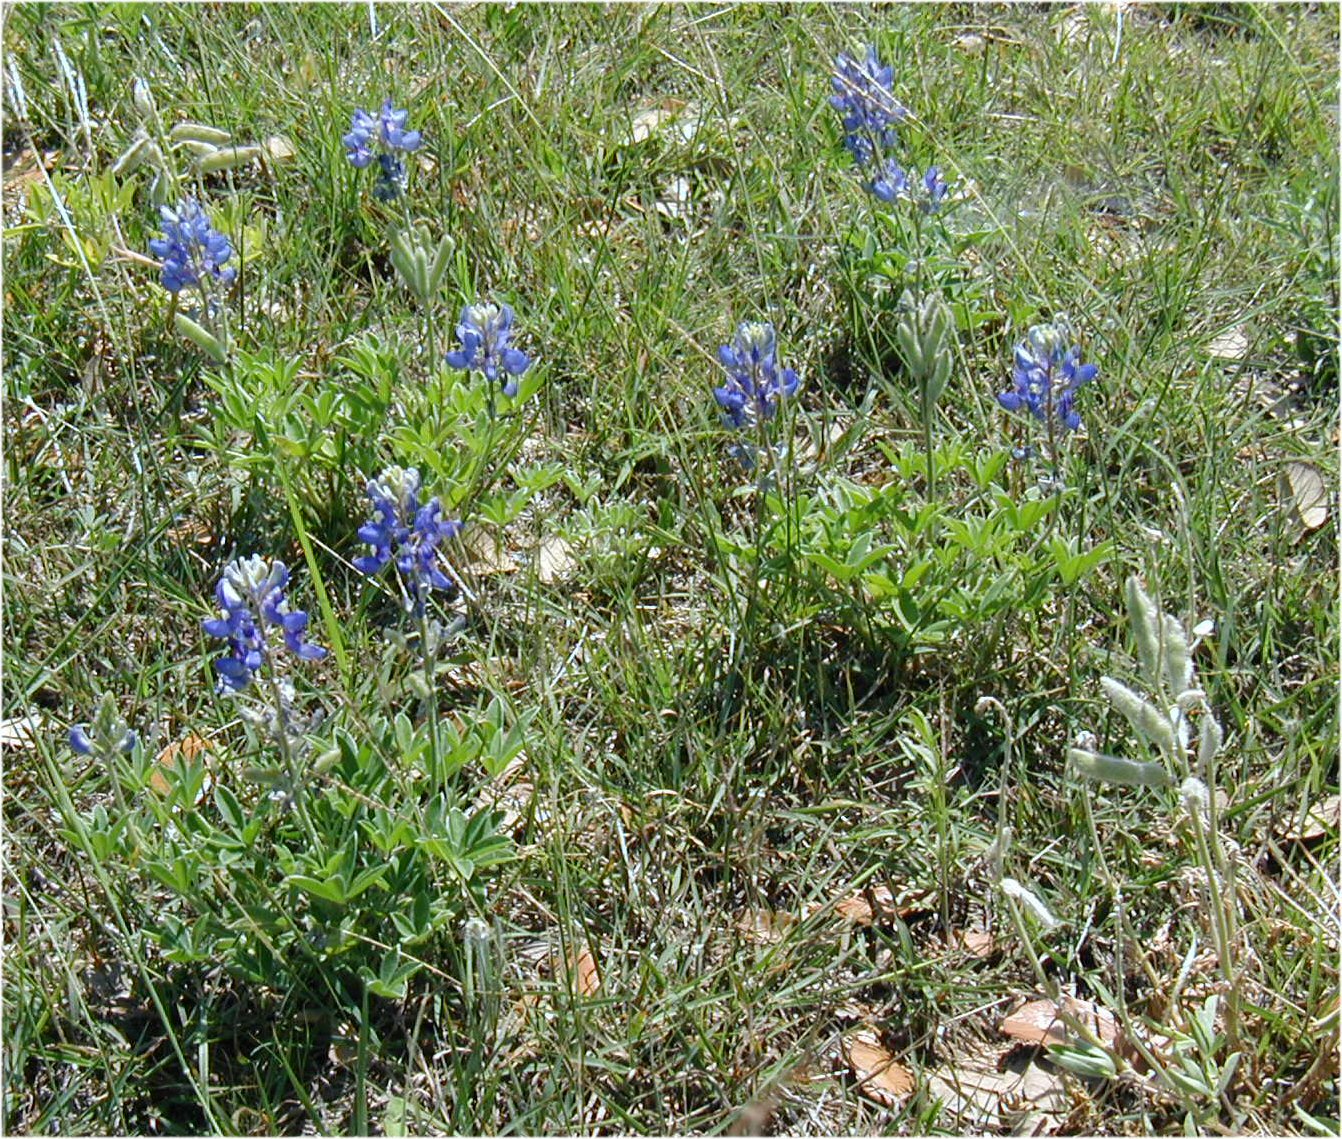 several wildflowers are growing in the grass